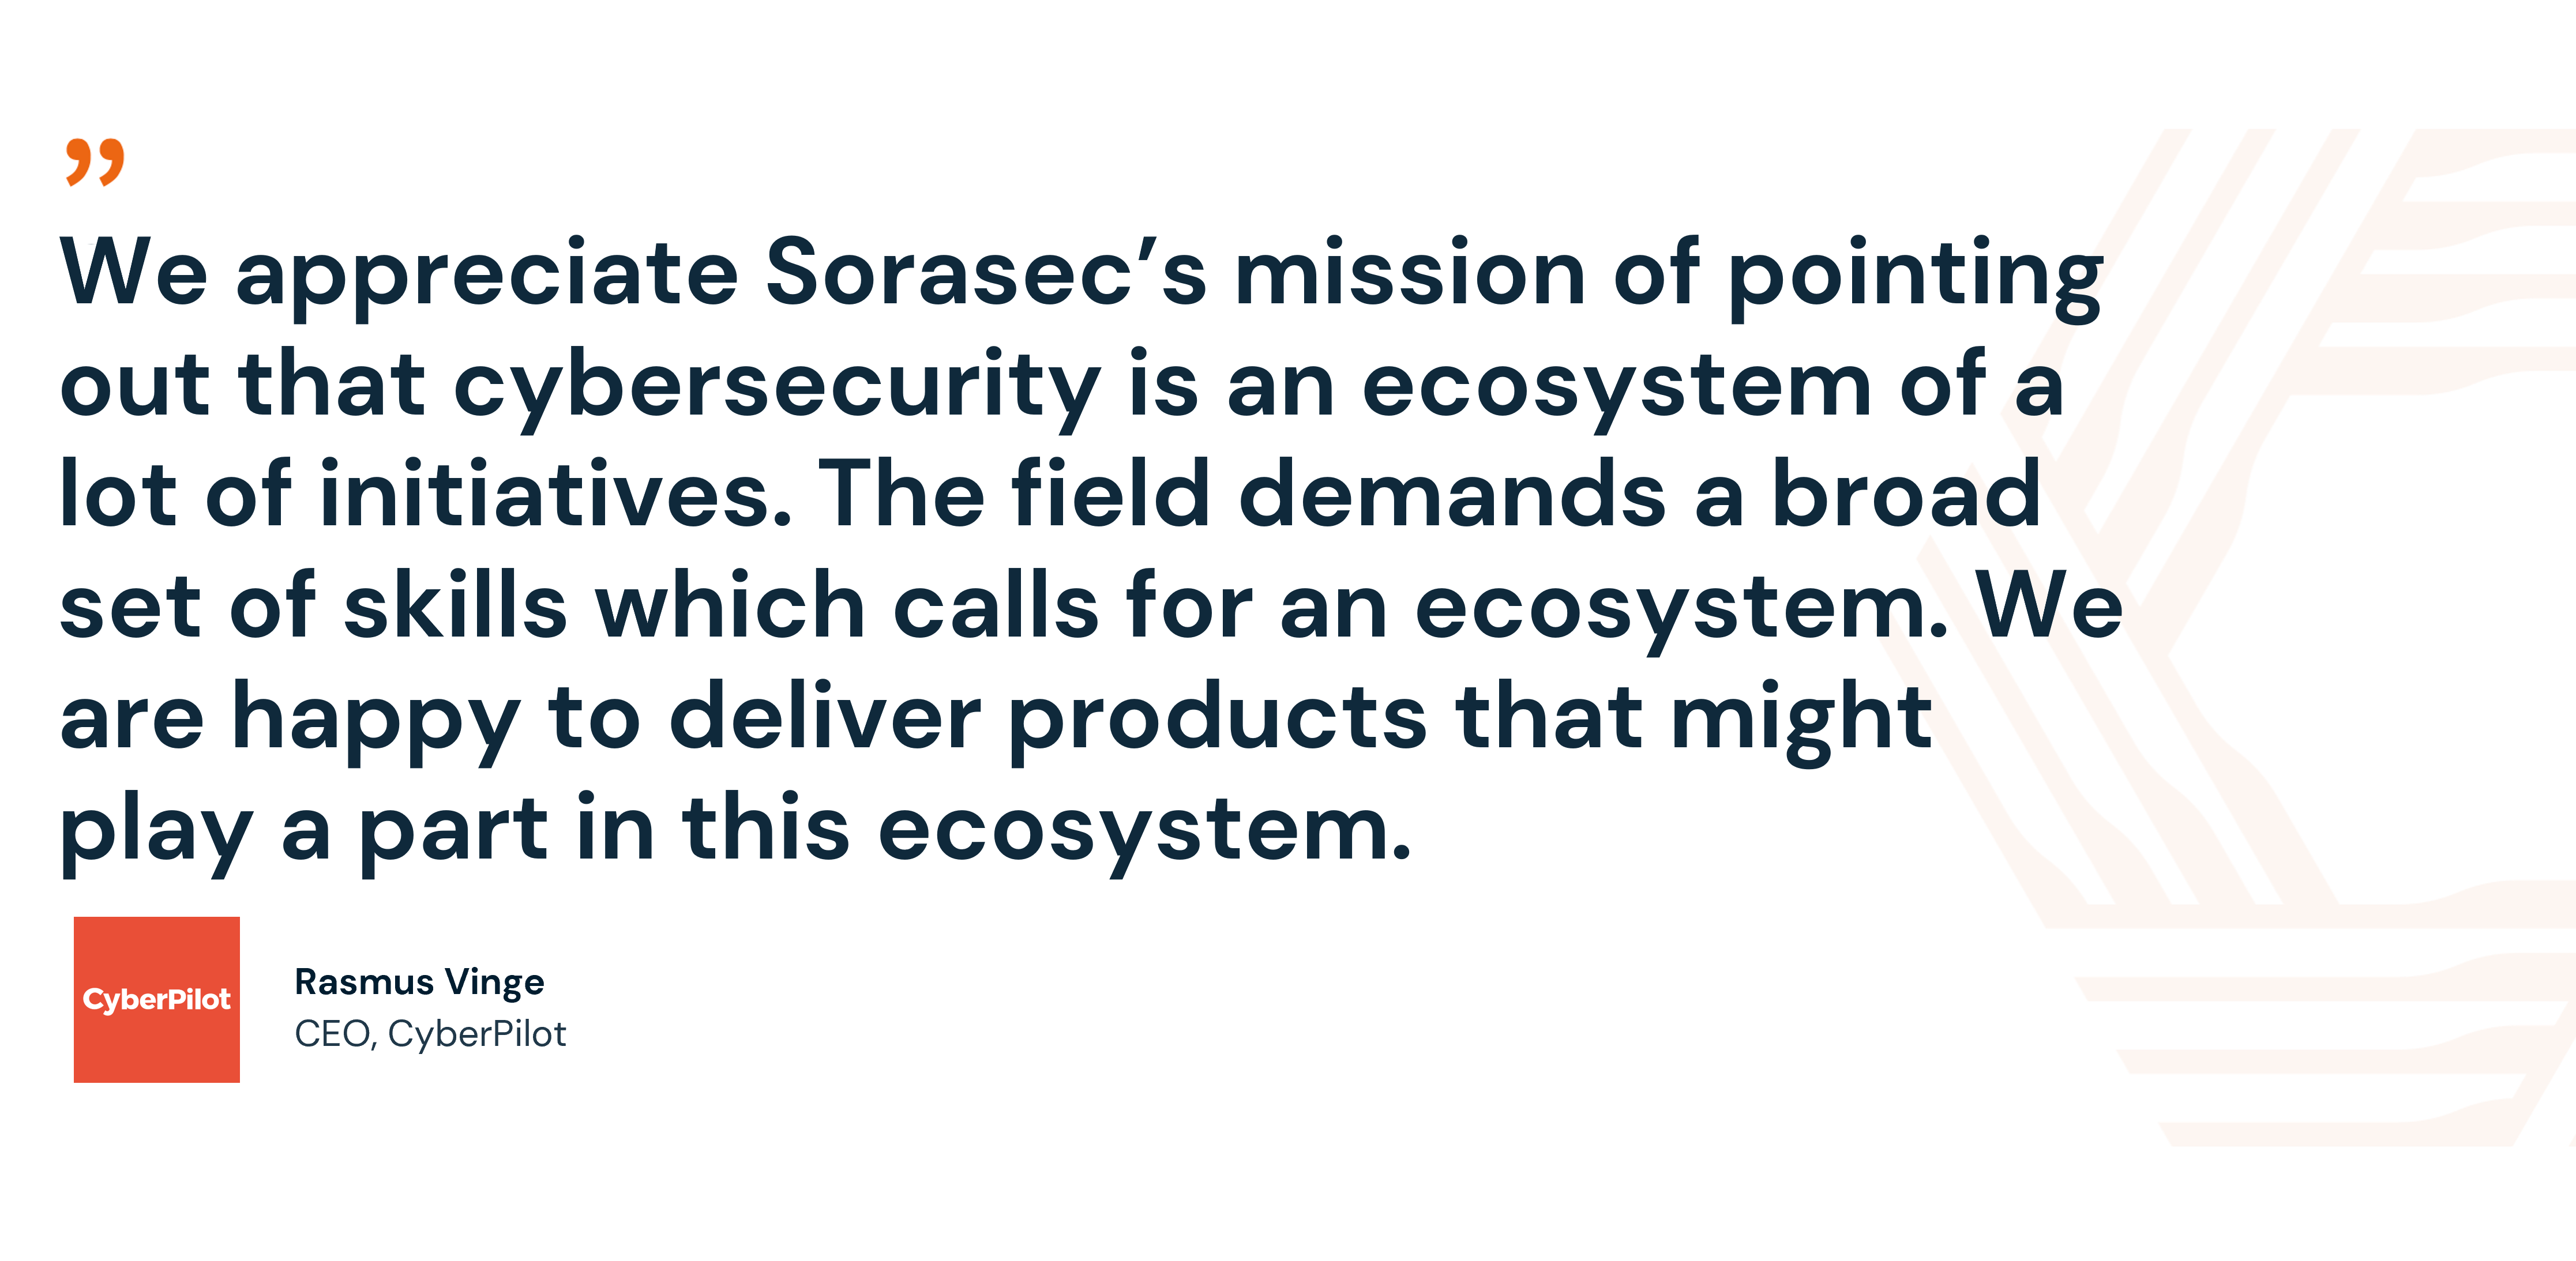 Quote from ecosystem partnerCyberPilot